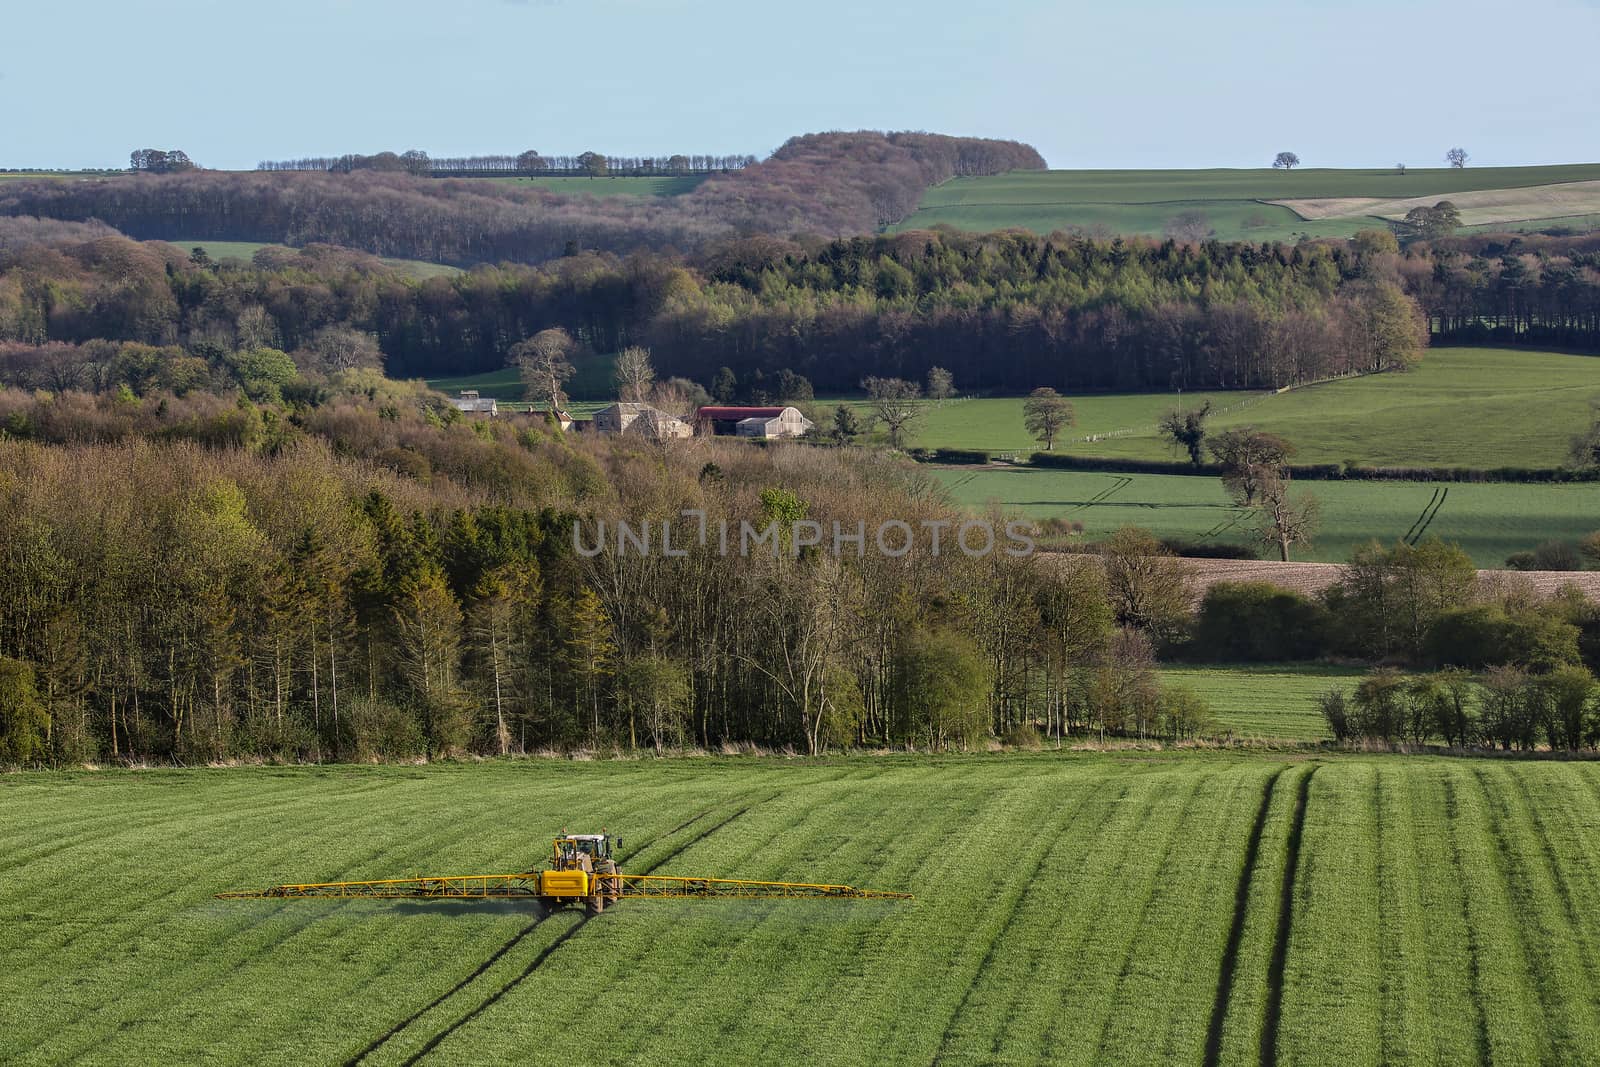 Agriculture - Spraying fertilizer on wheat crop in the North Yorkshire countryside - England.